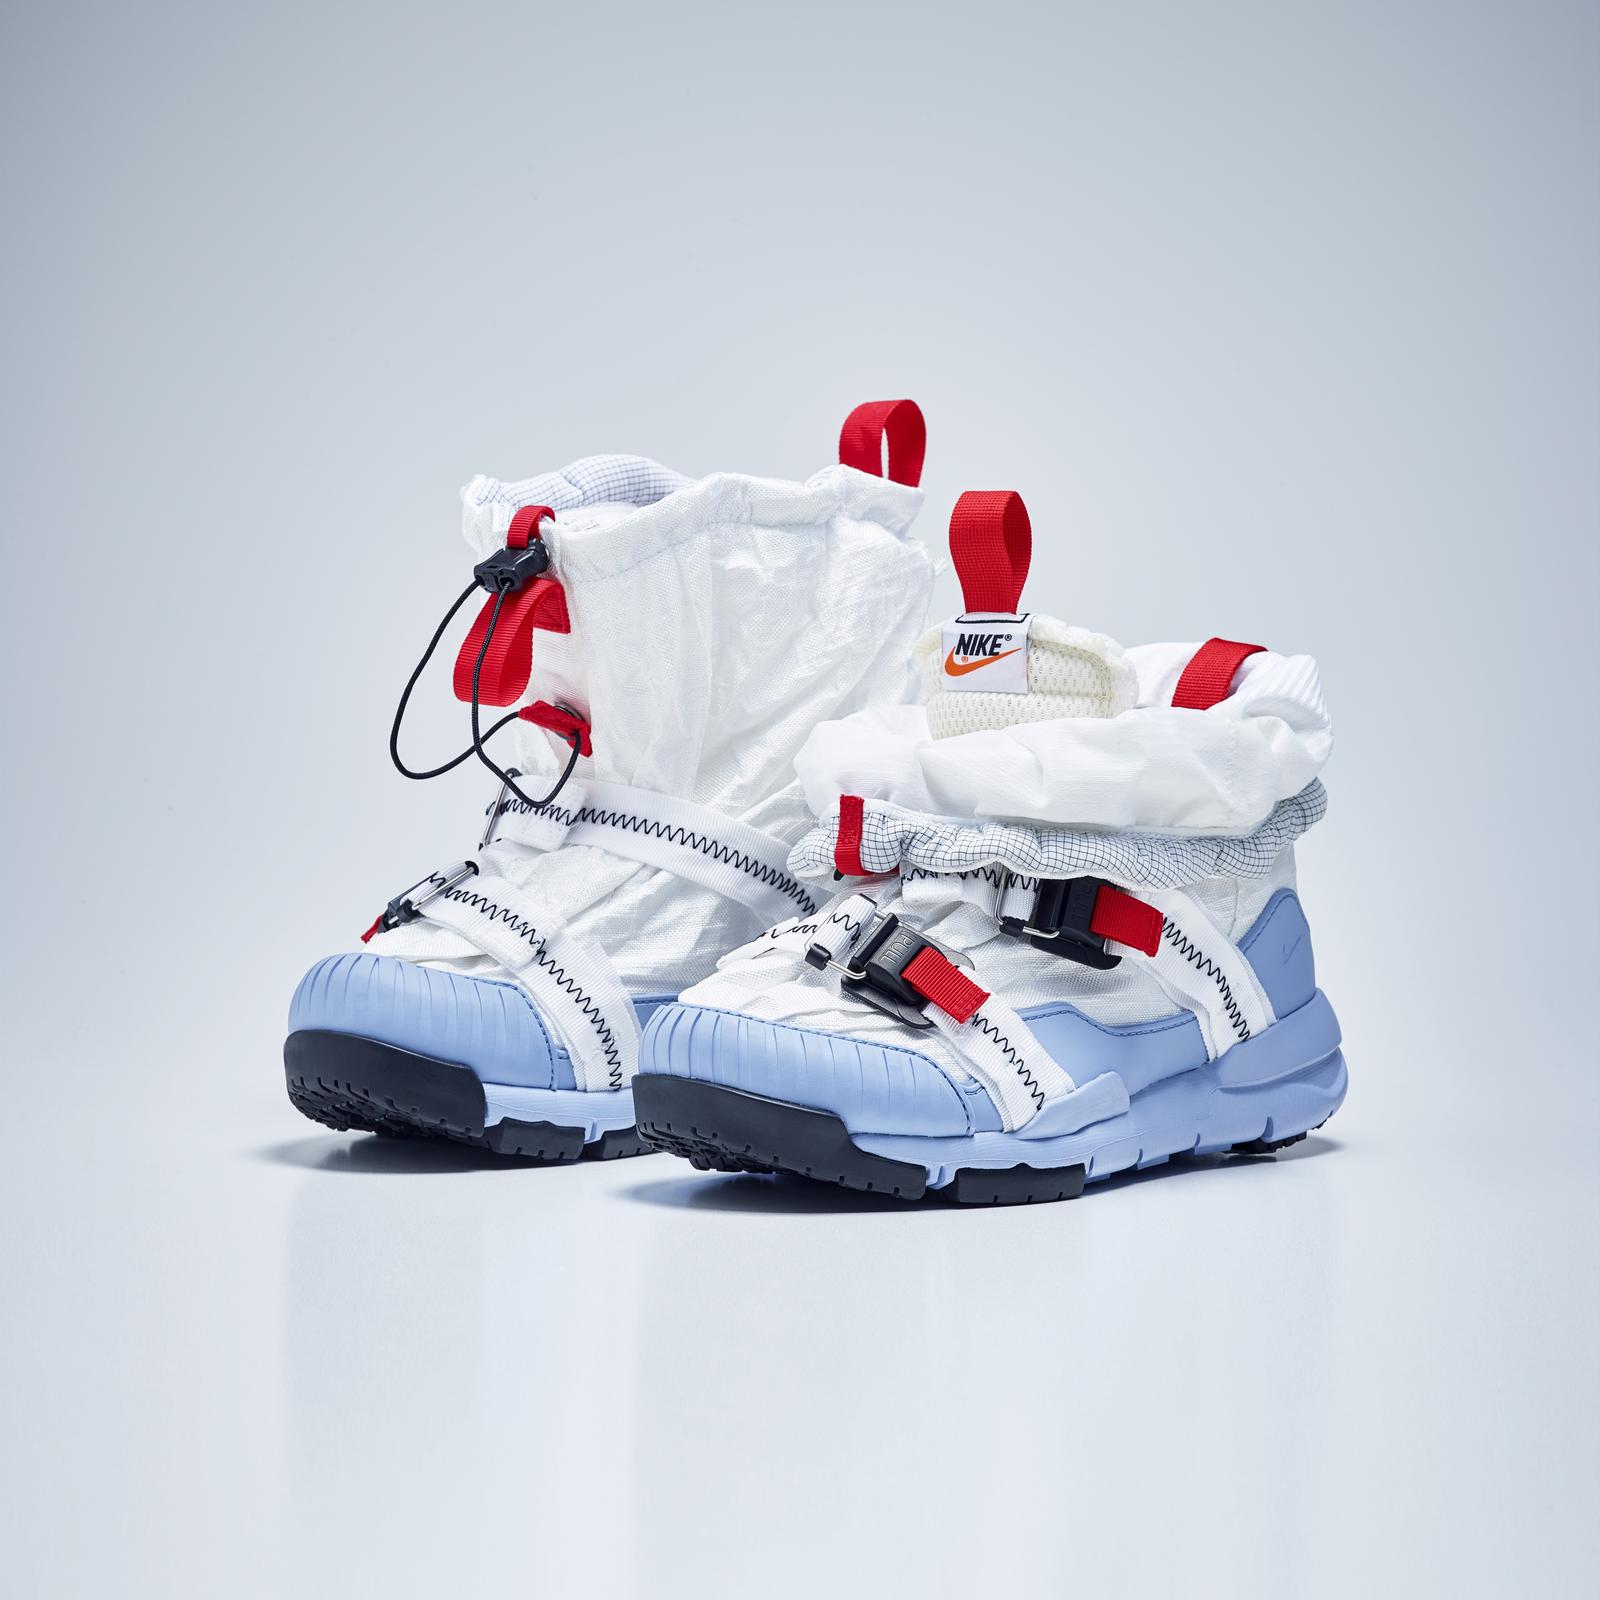 tom sachs nike mars yard over shoe release date price product1